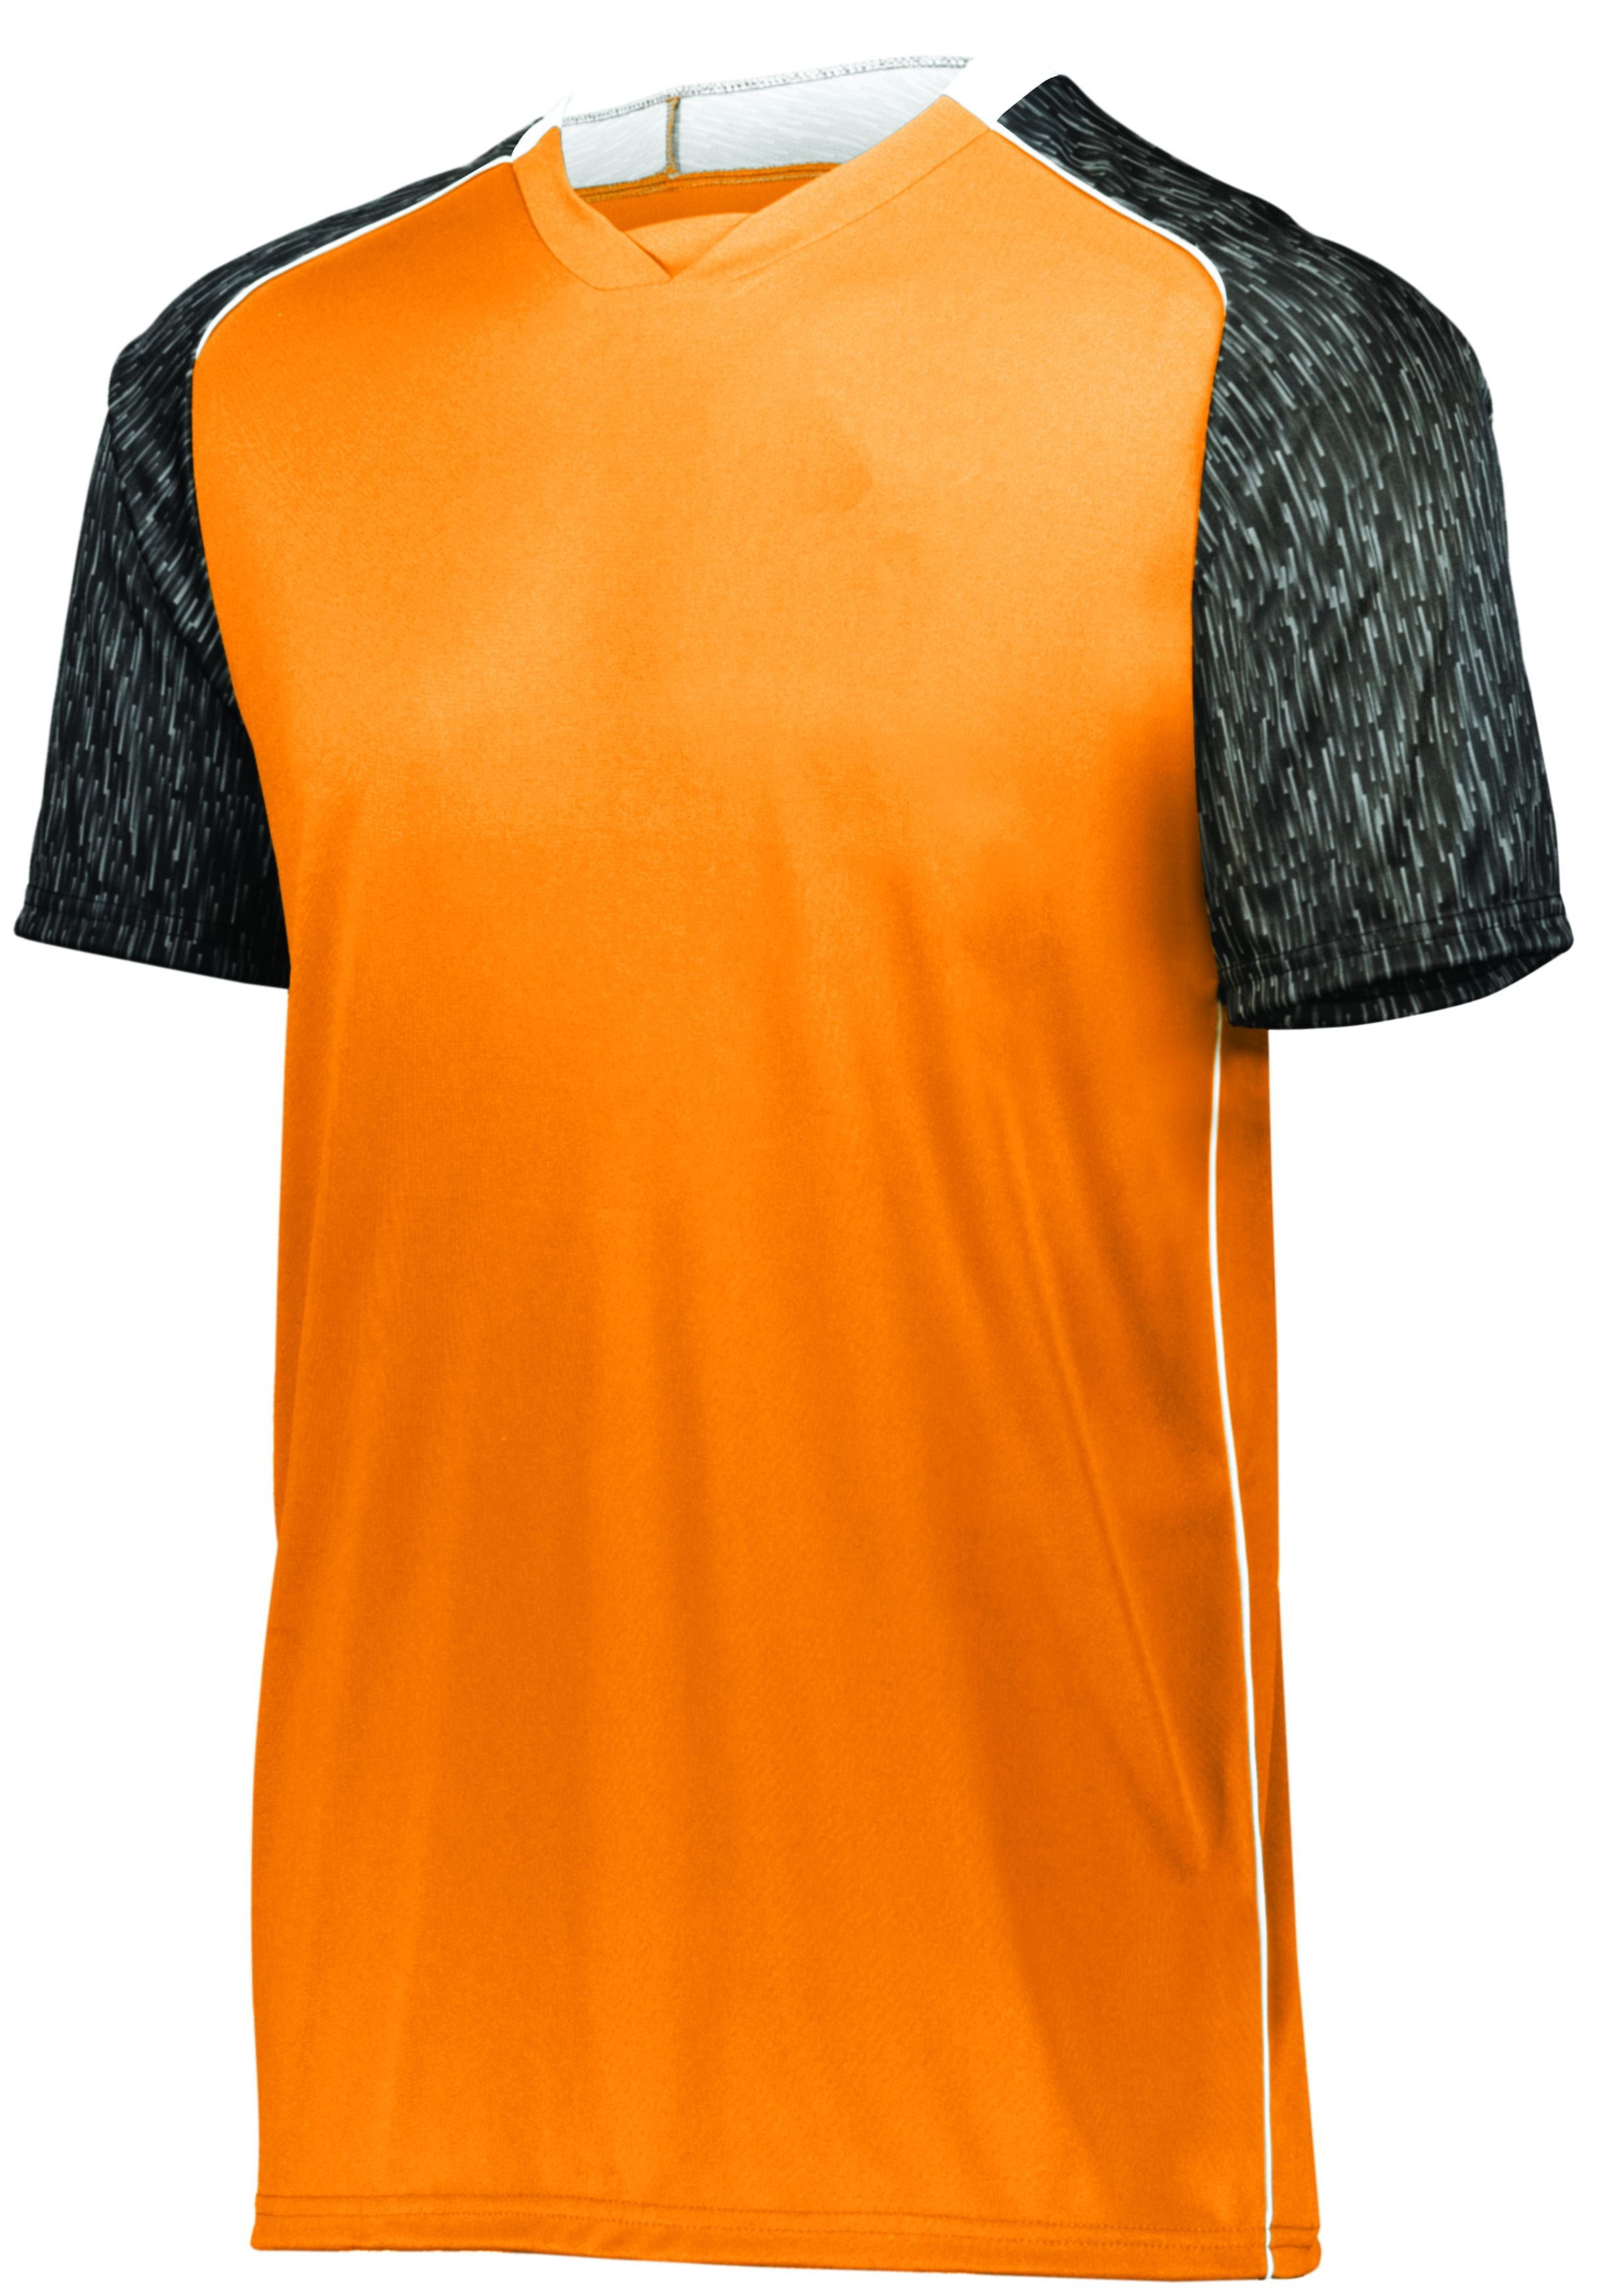 High 5 Youth Hawthorn Soccer Jersey in Power Orange/Black Print/White  -Part of the Youth, Youth-Jersey, High5-Products, Soccer, Shirts, All-Sports-1 product lines at KanaleyCreations.com